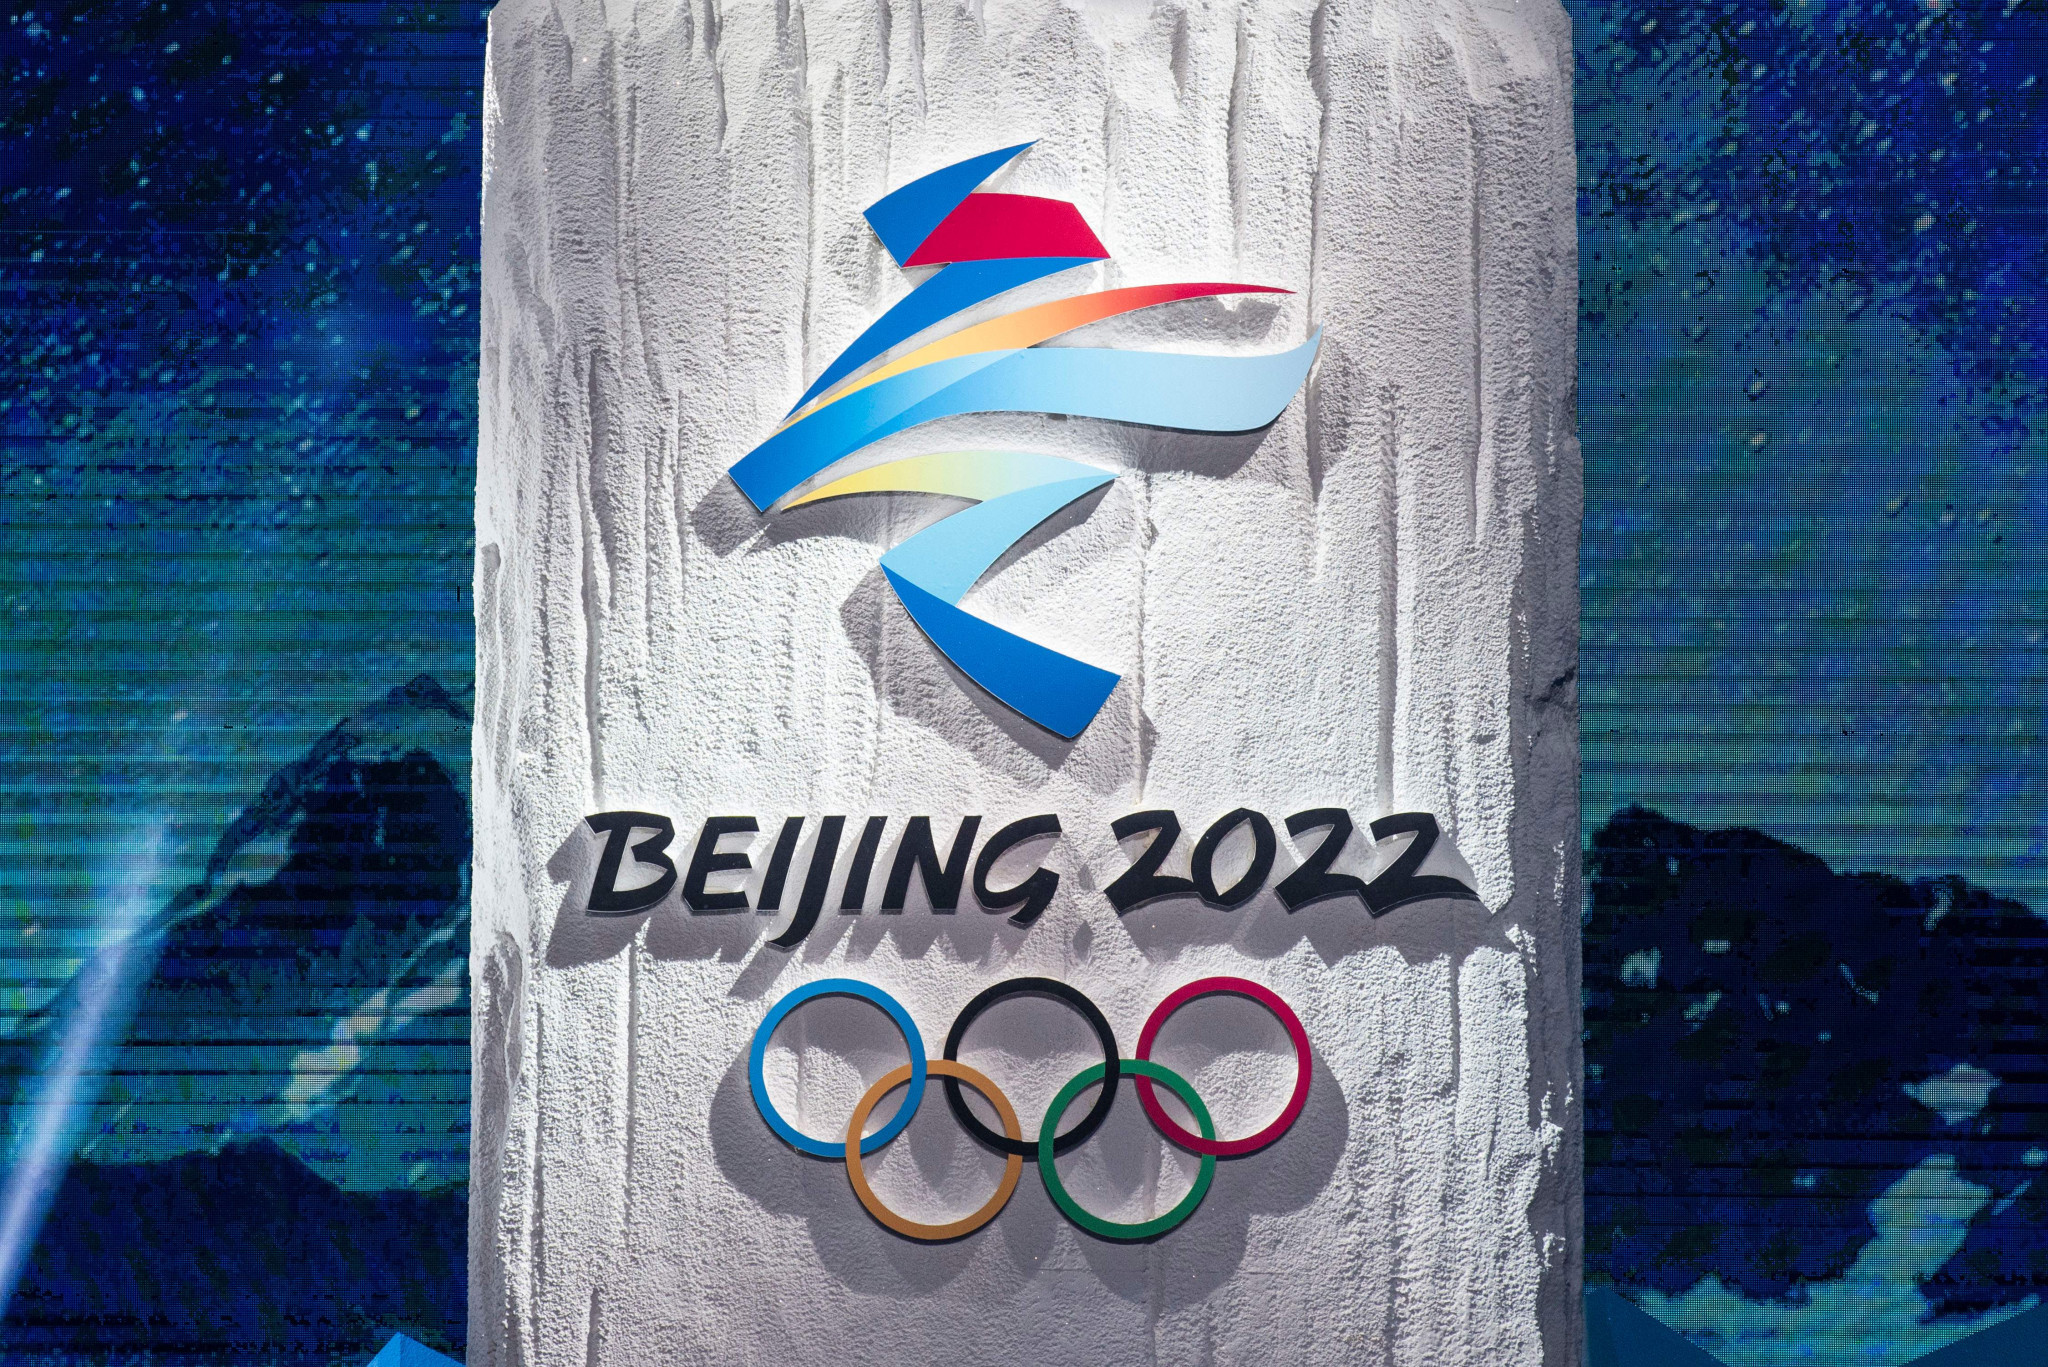 The playbooks for Beijing 2022 include a 